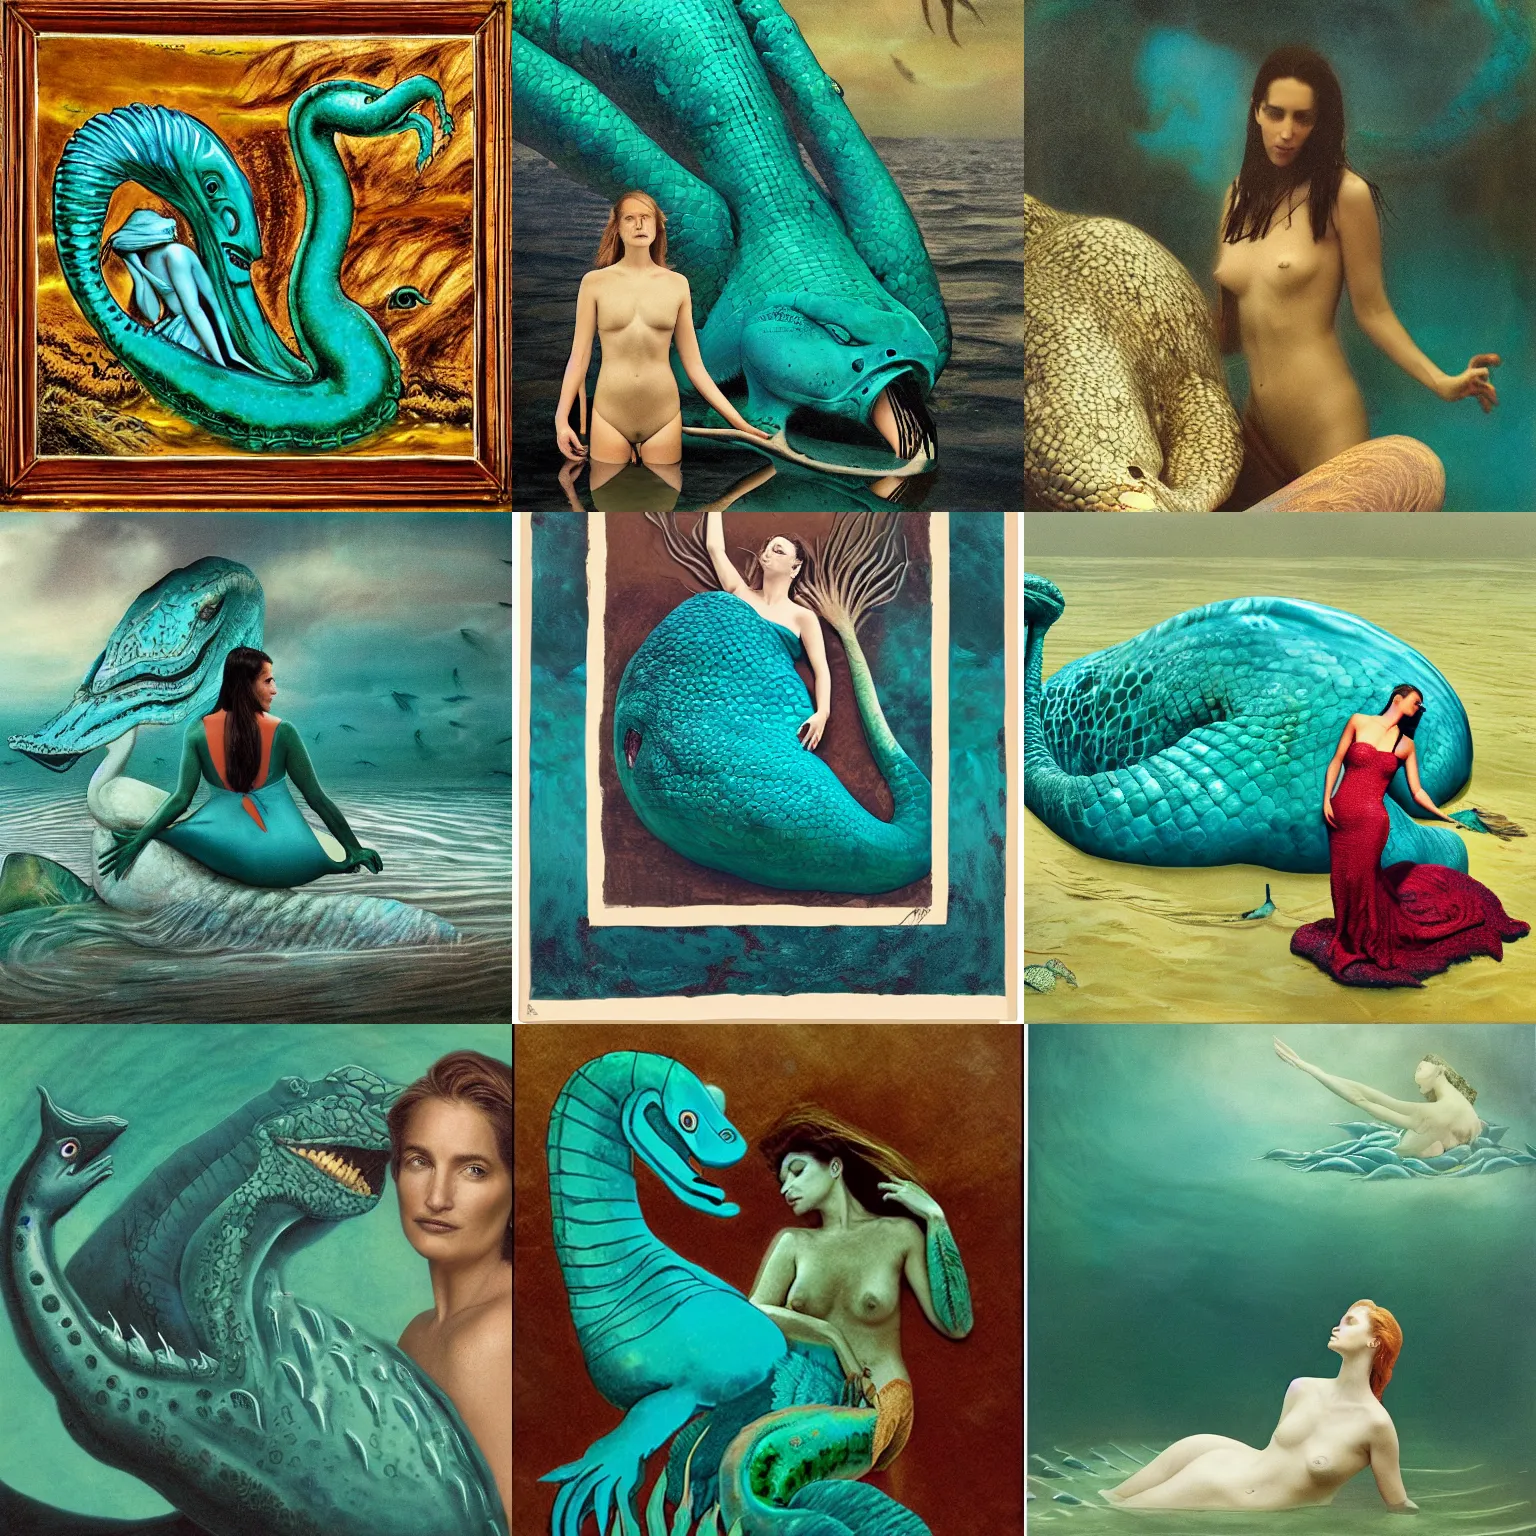 Prompt: Picture of a woman and a large turquoise reptile like sea monster by Annie Leibovitz in the style of Leda and the Swan.